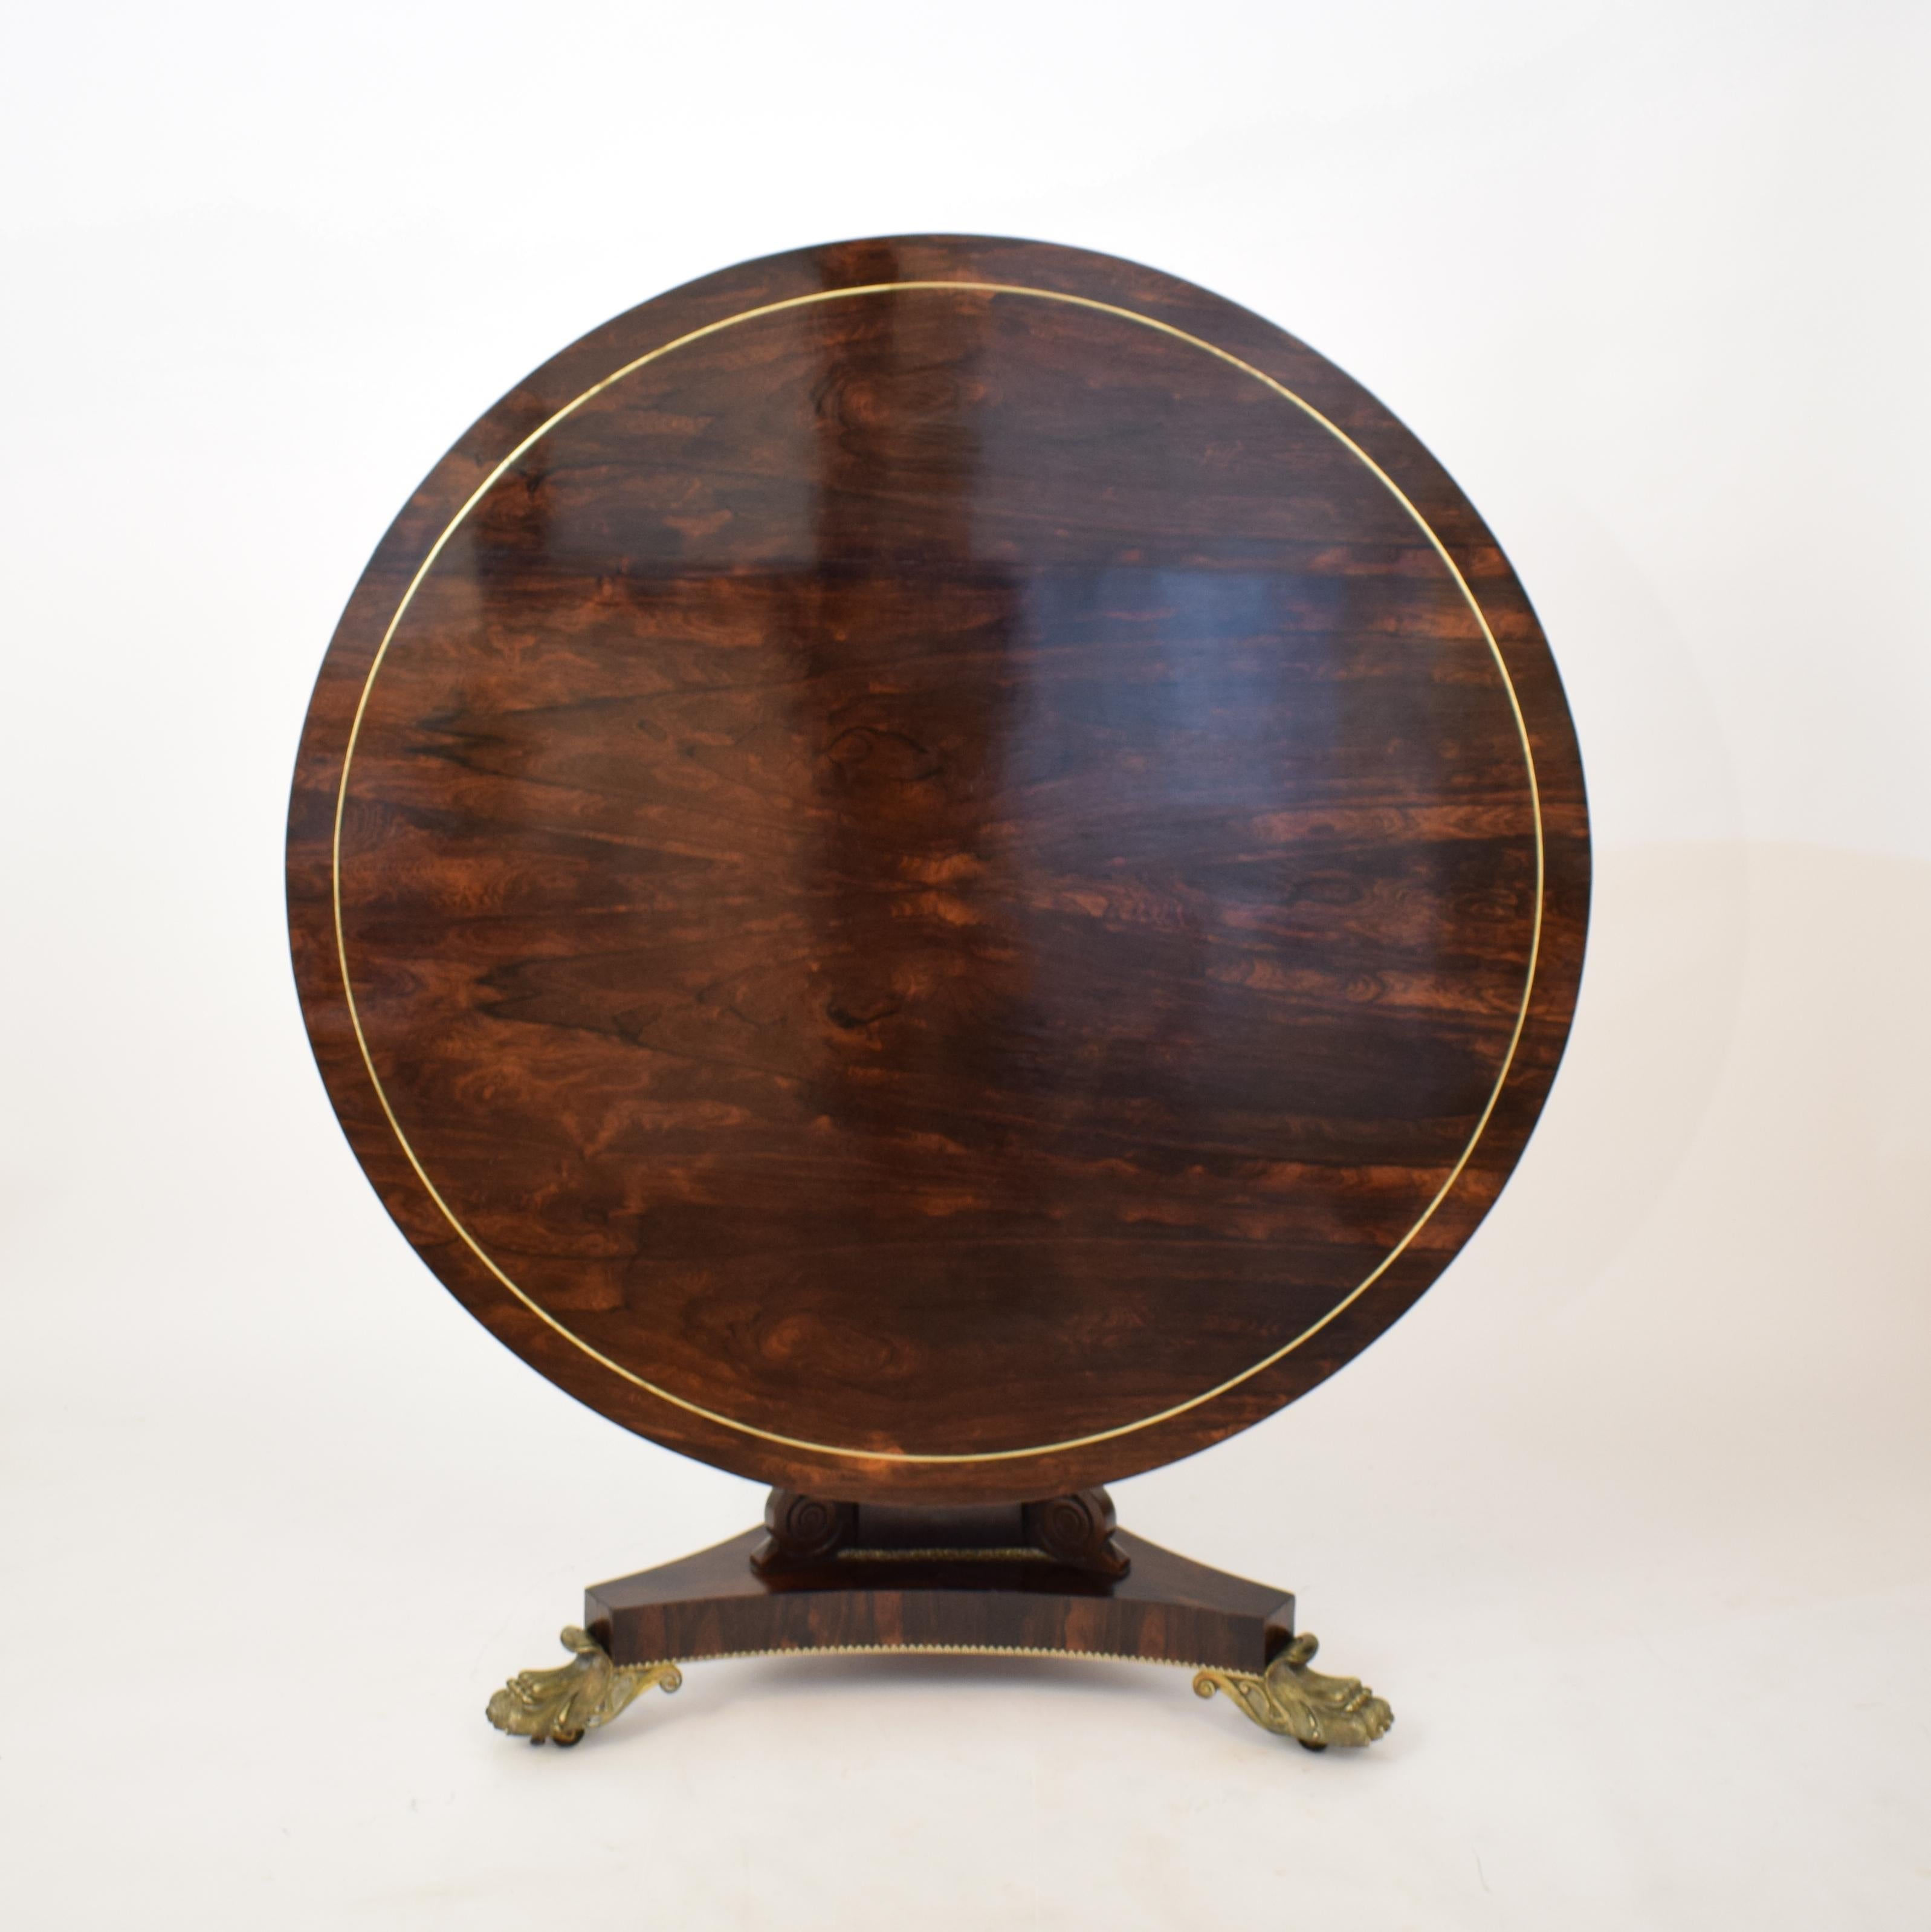 This beautiful 19th century George IV brass inlaid rosewood centre table circa 1840s is attributed to Gillows of Lancaster & London.
The table is made out of solid Mahogany and veneered in rosewood.
It has a circular tilt-top with brass string